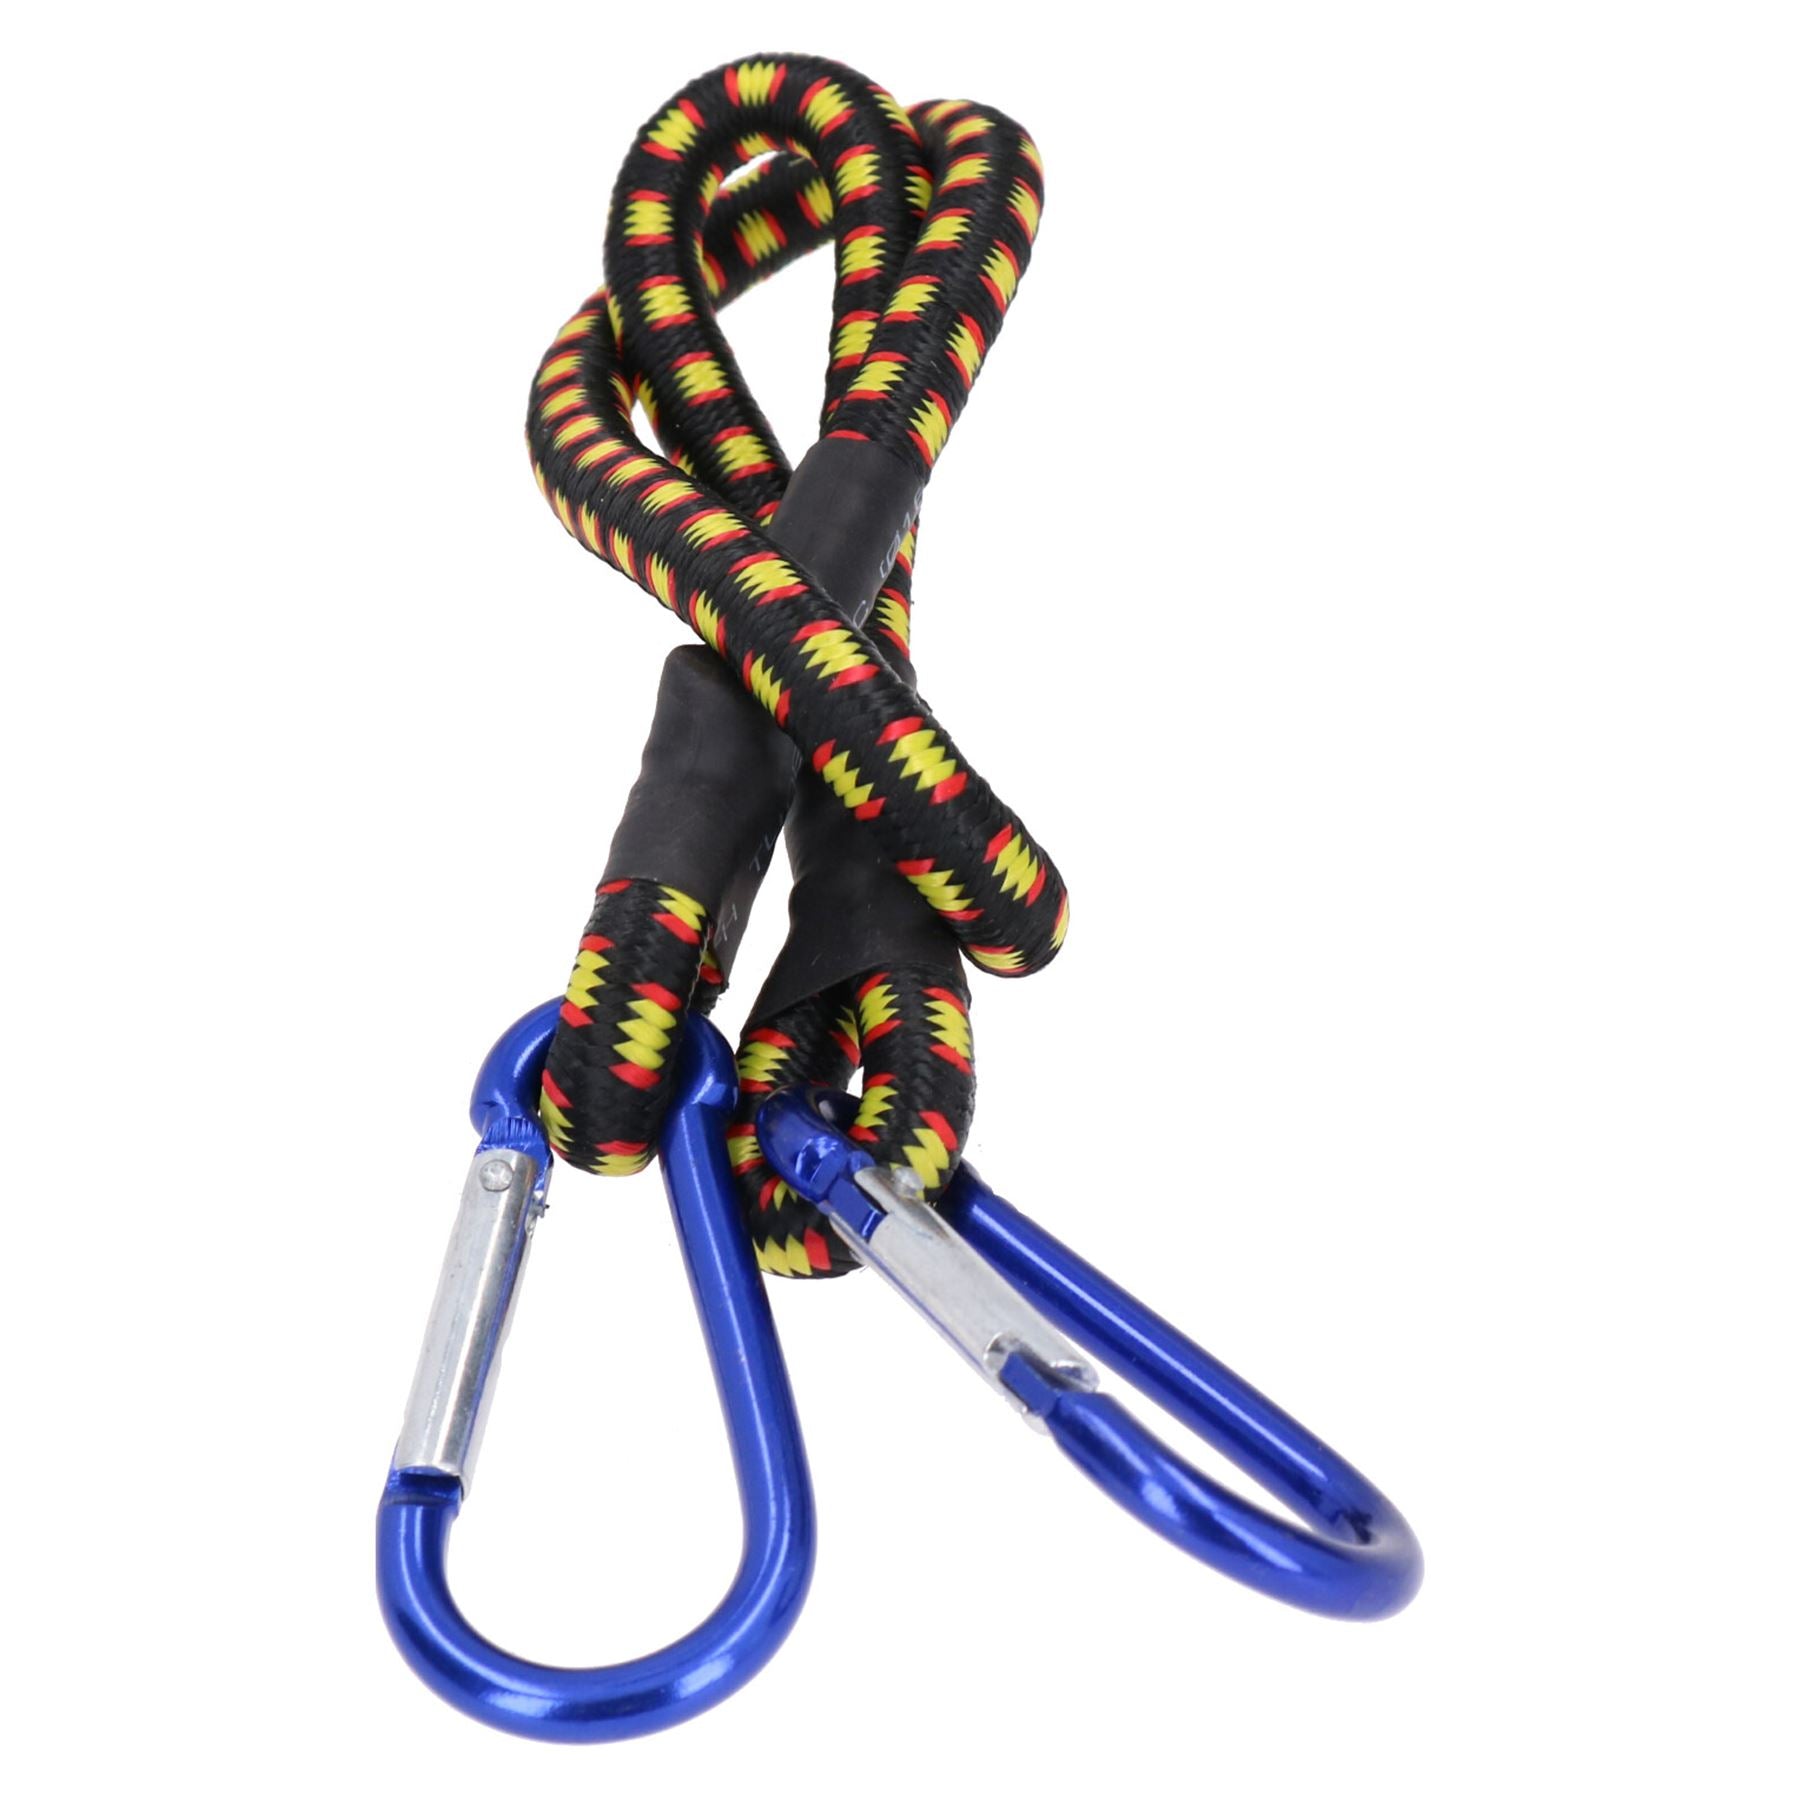 24” Bungee Strap with Aluminium Carabiners Hook Tie Down Fastener Holder